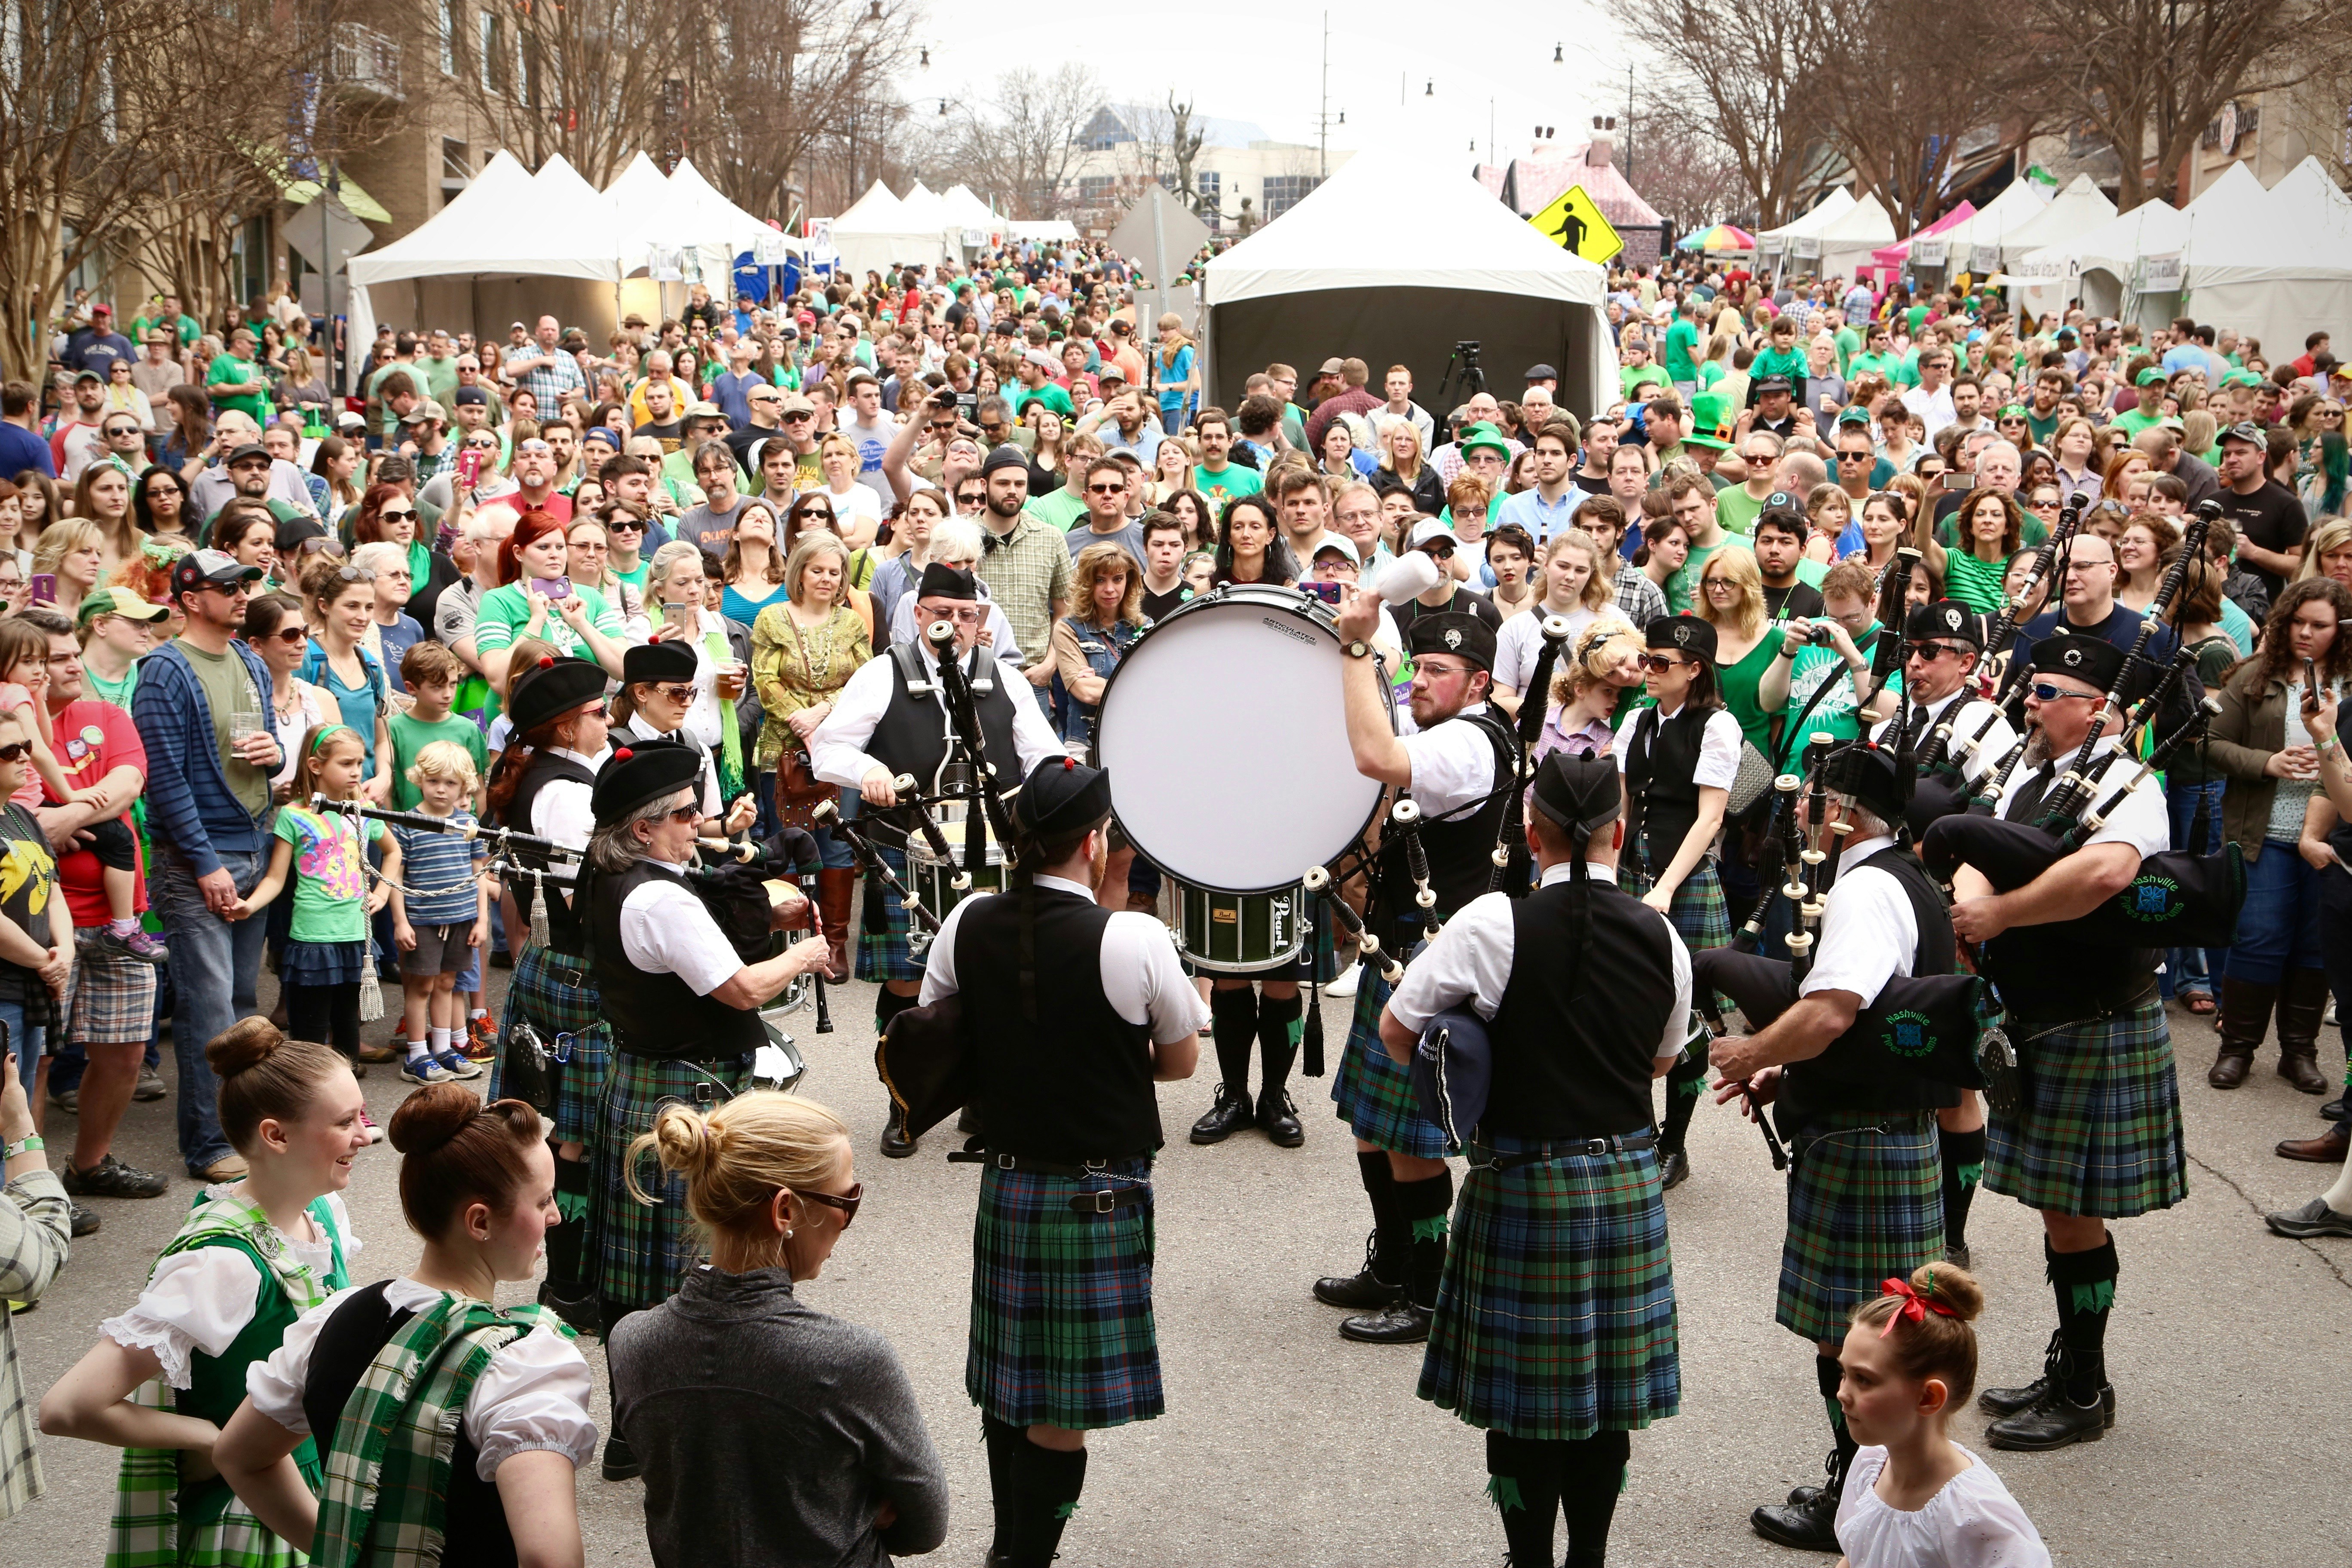 A pipe band puts on a street performance